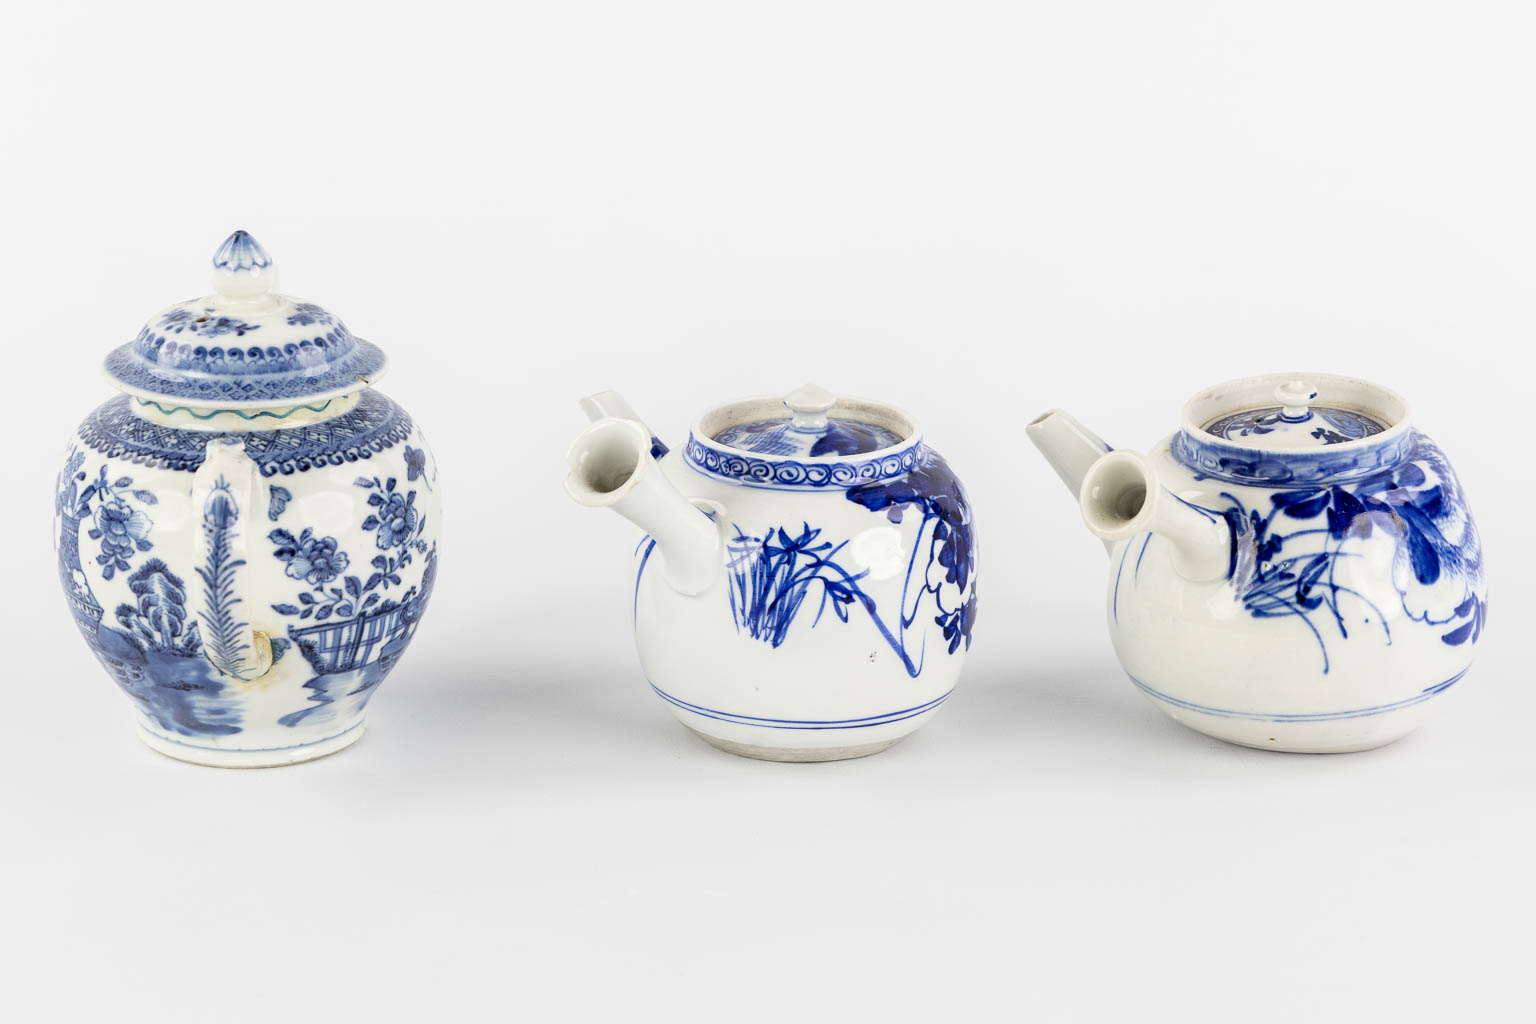 Three Chinese and Japanese teapots, blue-white decor. (W:20 x H:14 cm)